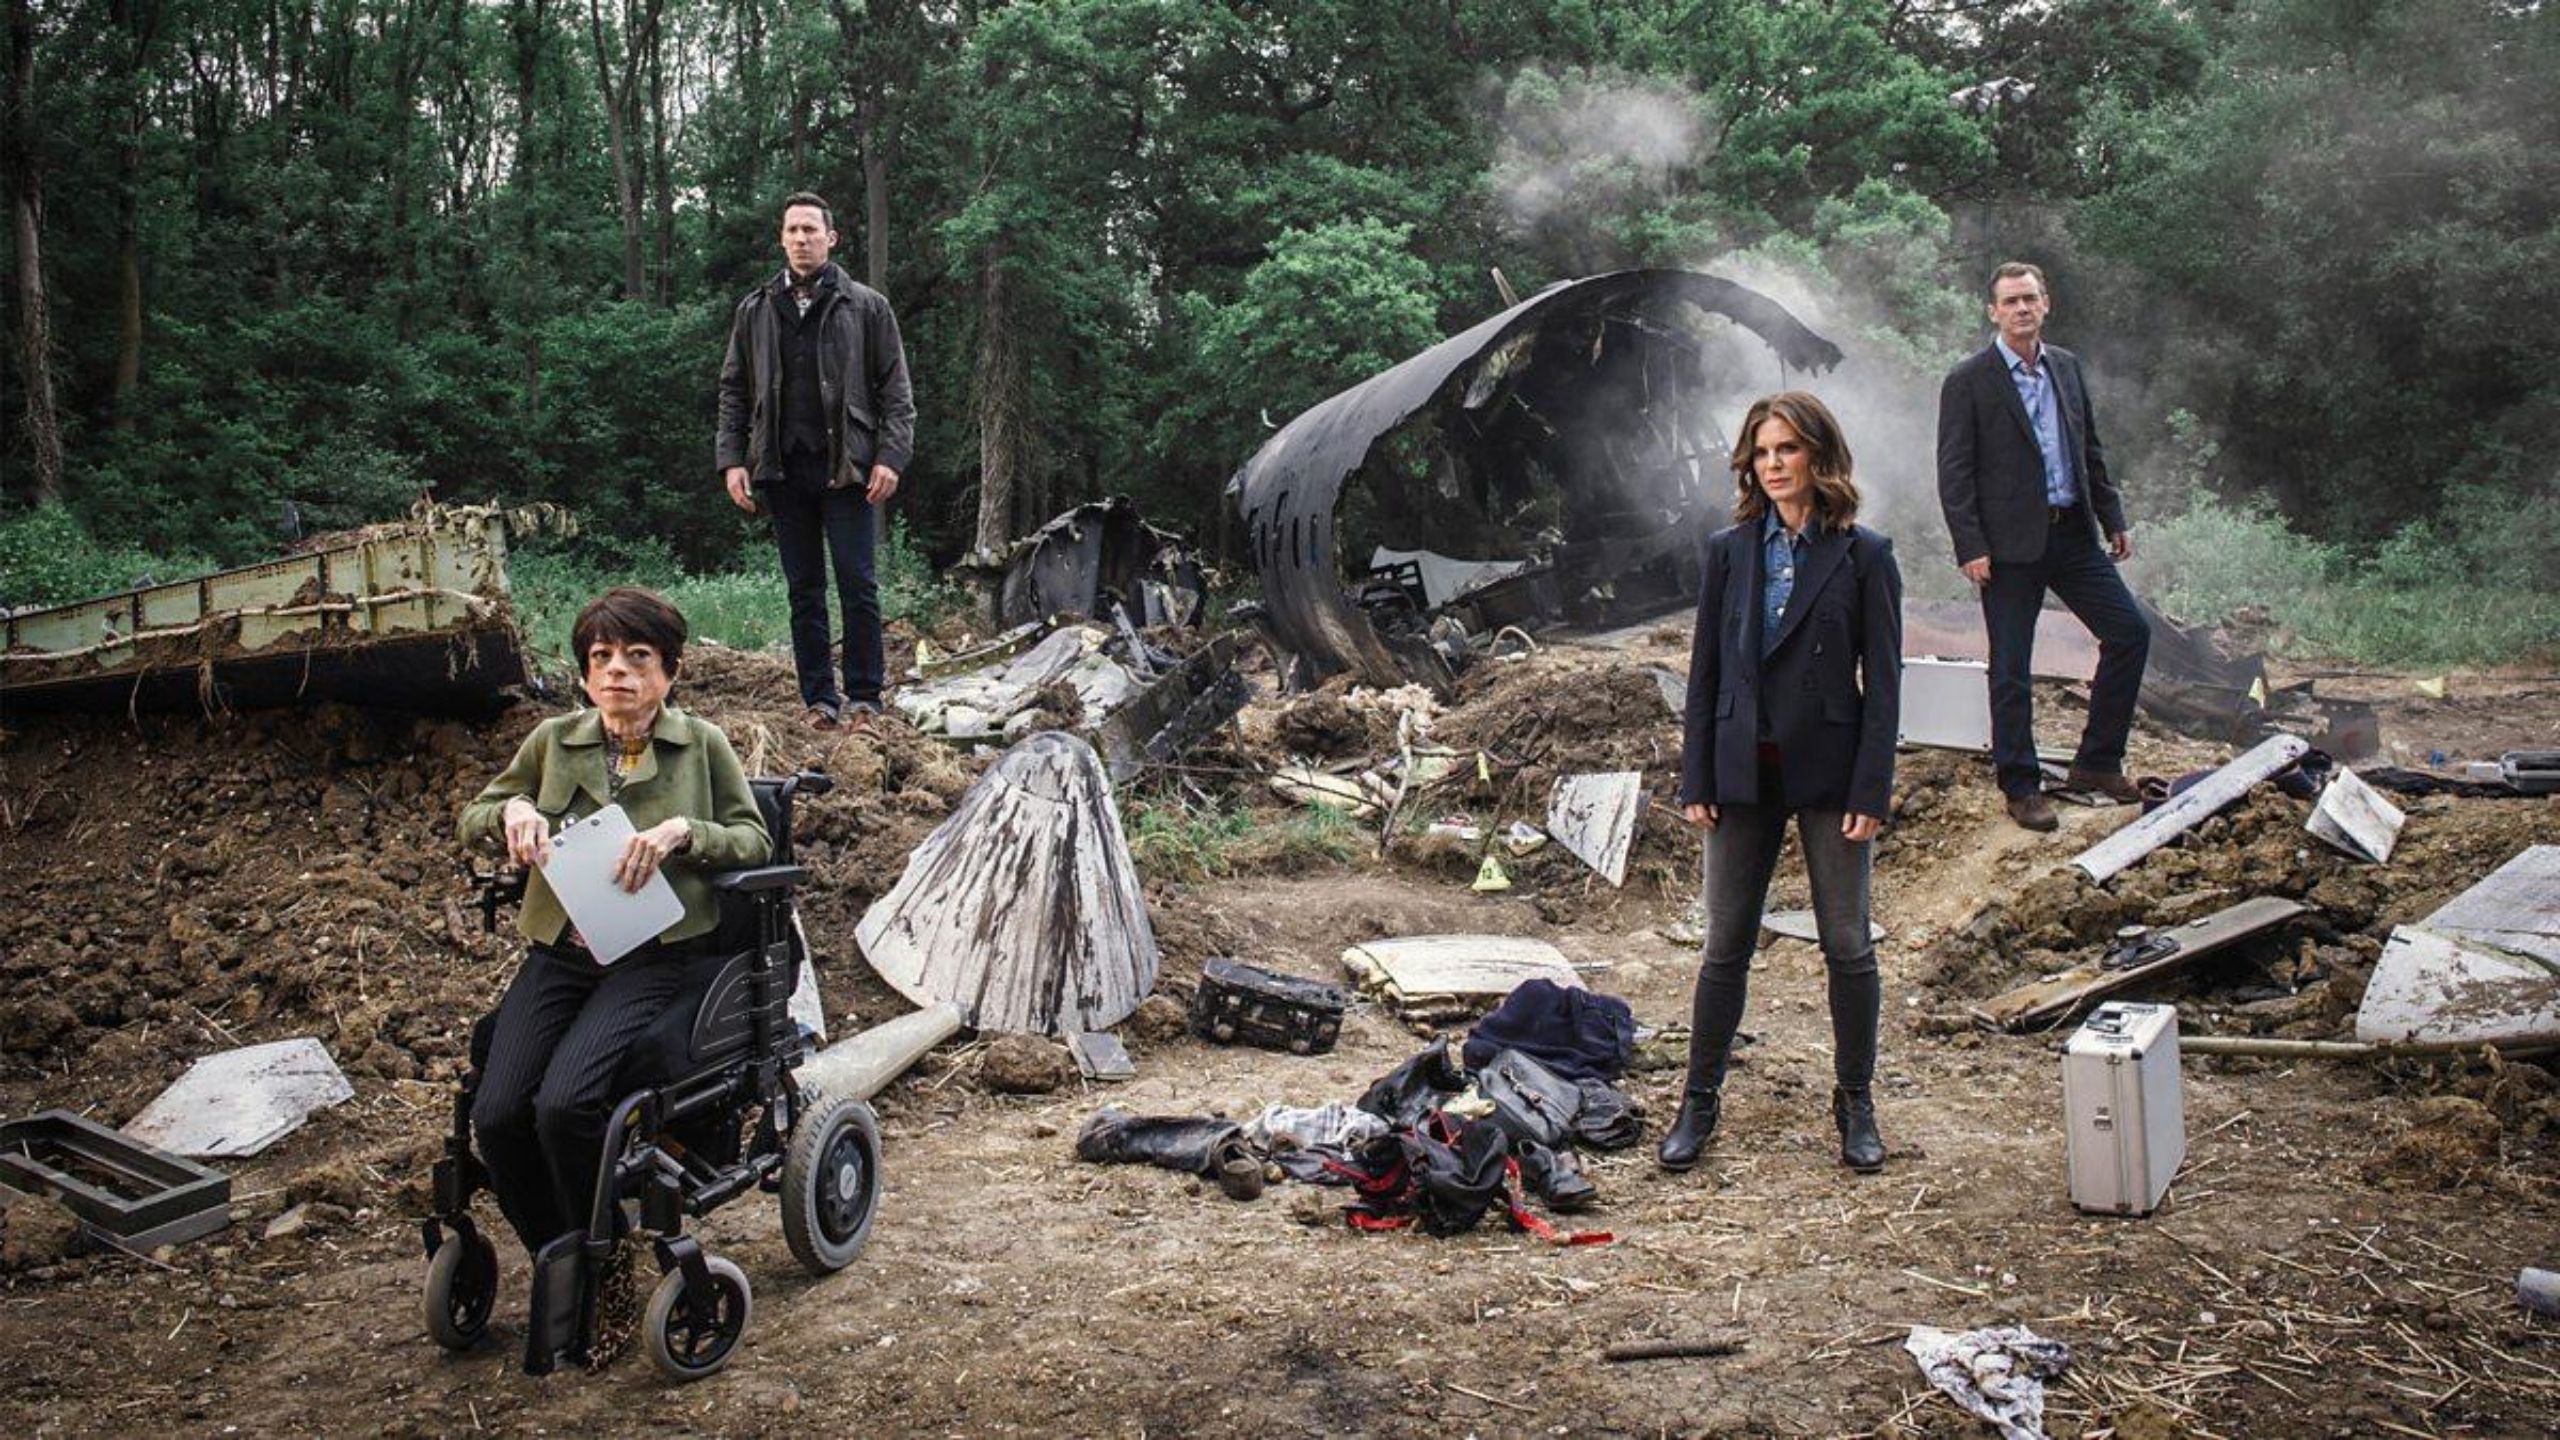 Cast of Silent Witness stand by a plane wreckage